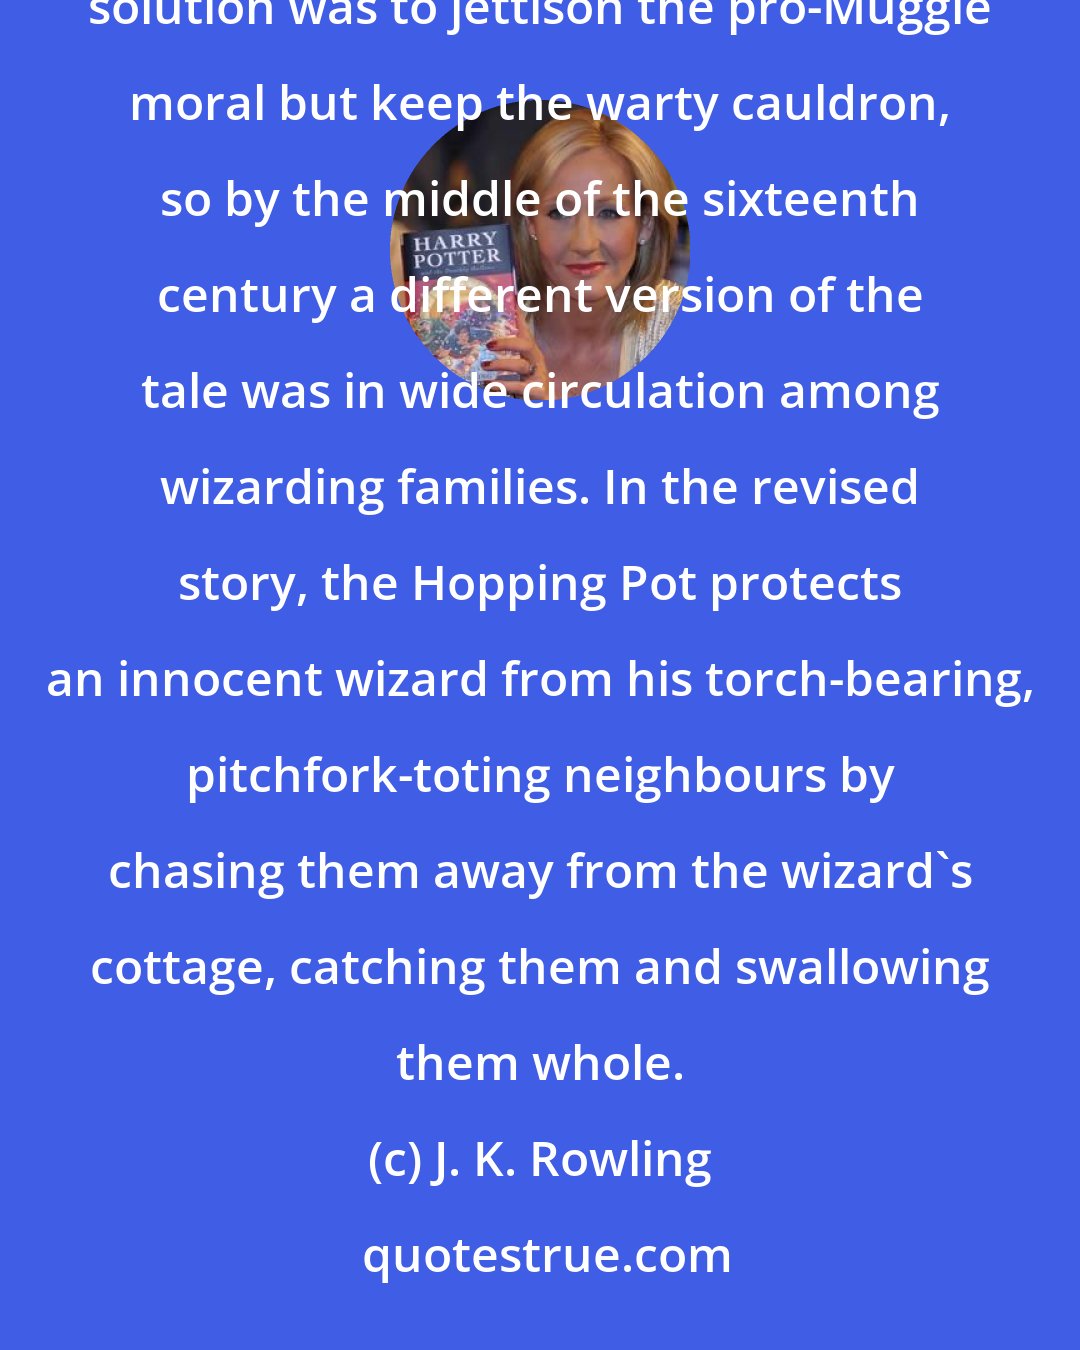 J. K. Rowling: Children being children, however, the grotesque Hopping Pot had taken hold of their imaginations. The solution was to jettison the pro-Muggle moral but keep the warty cauldron, so by the middle of the sixteenth century a different version of the tale was in wide circulation among wizarding families. In the revised story, the Hopping Pot protects an innocent wizard from his torch-bearing, pitchfork-toting neighbours by chasing them away from the wizard's cottage, catching them and swallowing them whole.